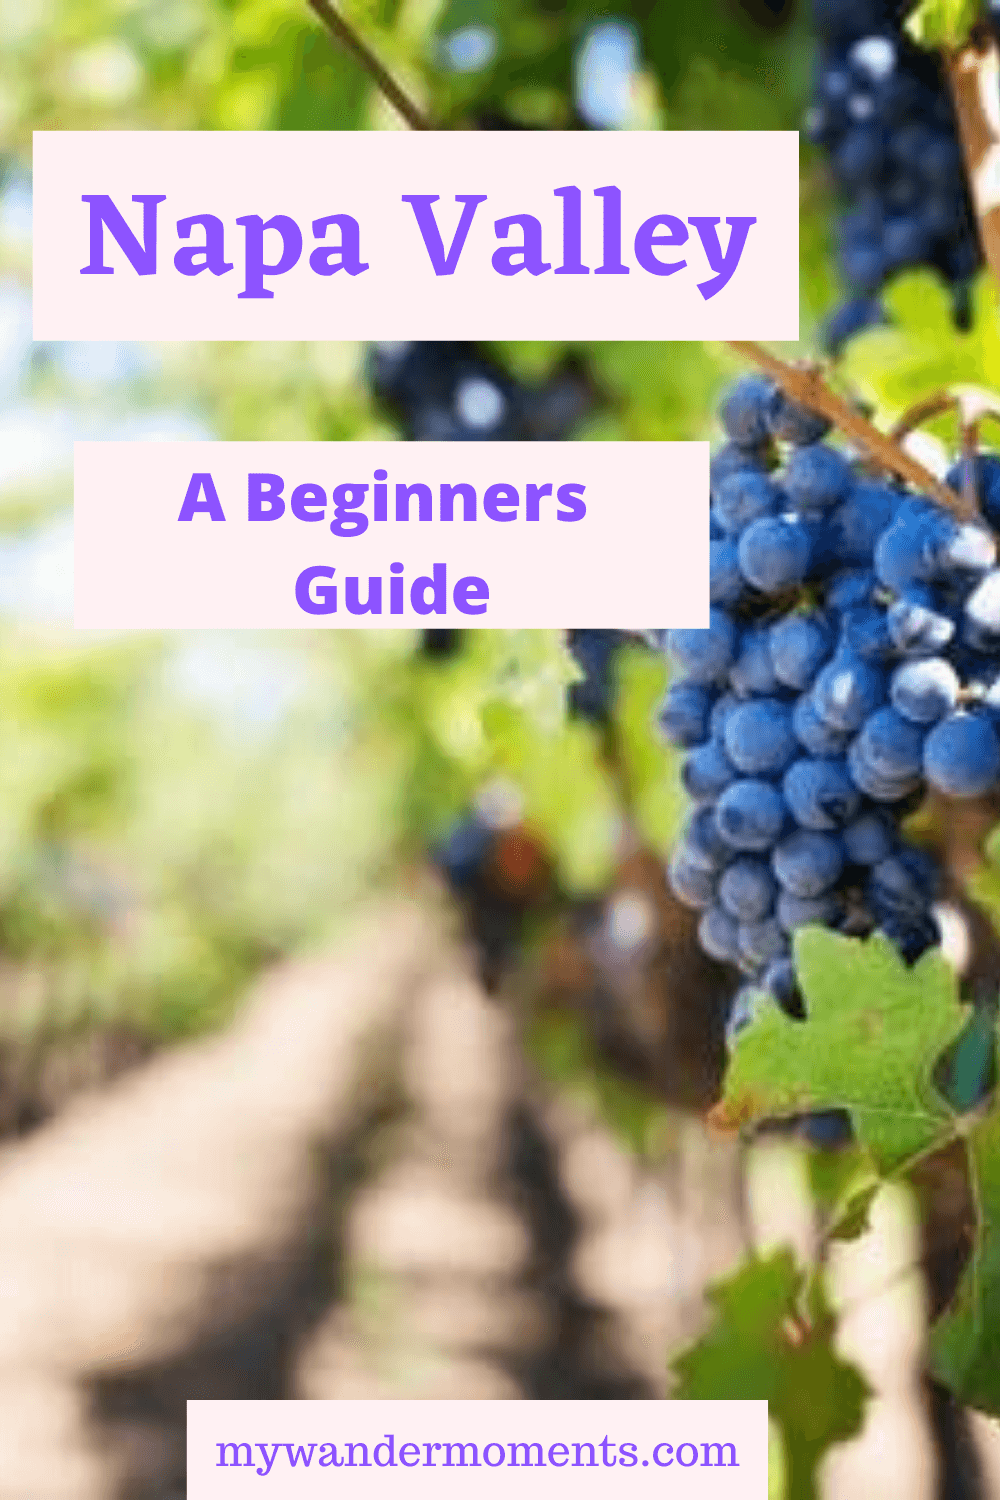 A Beginners Guide to Napa Valley